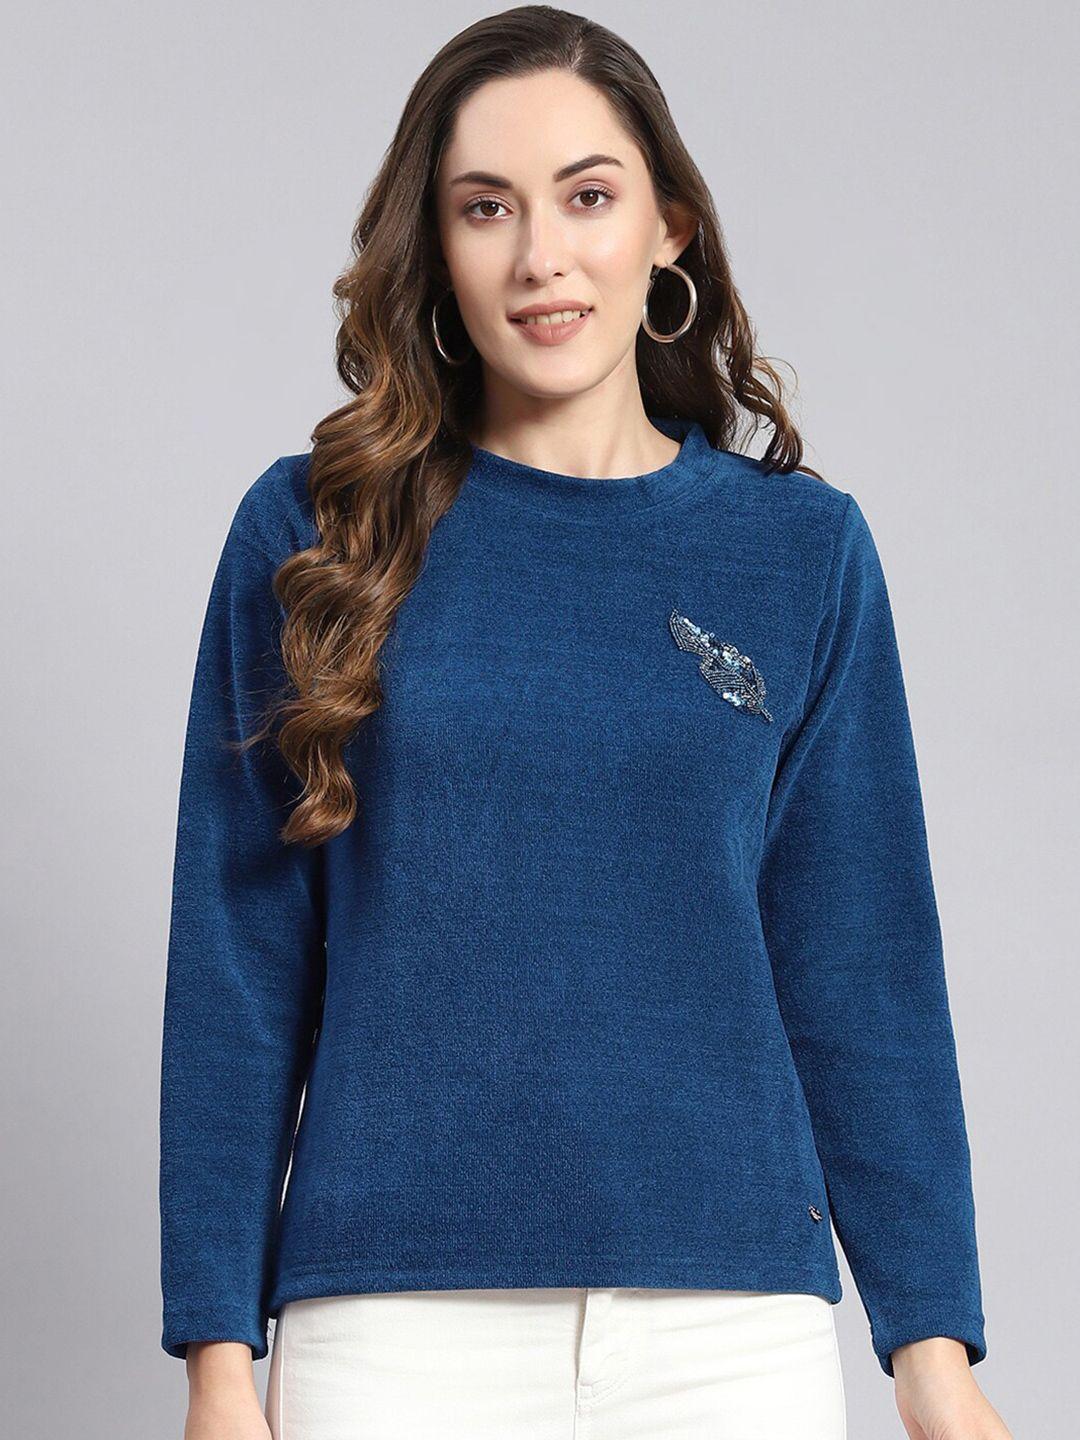 monte carlo embellished round neck pullover sweater